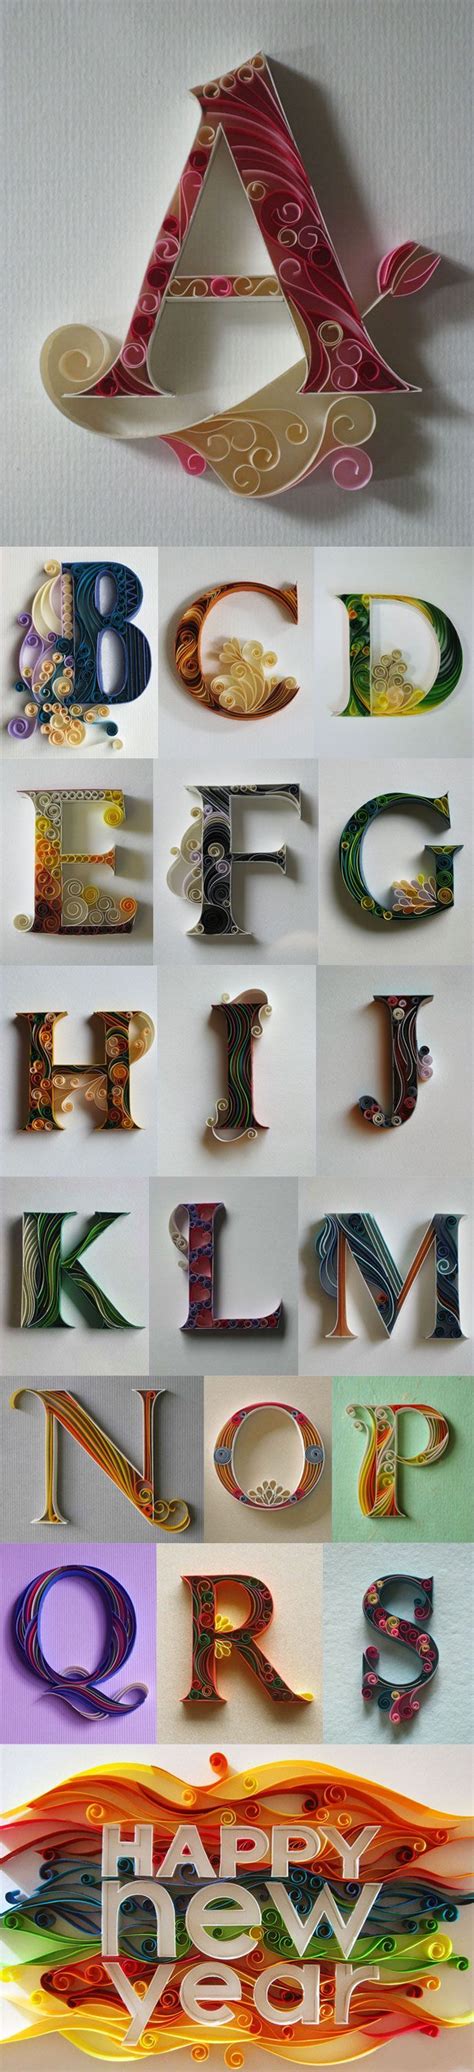 quilled letters images  pinterest quilling letters